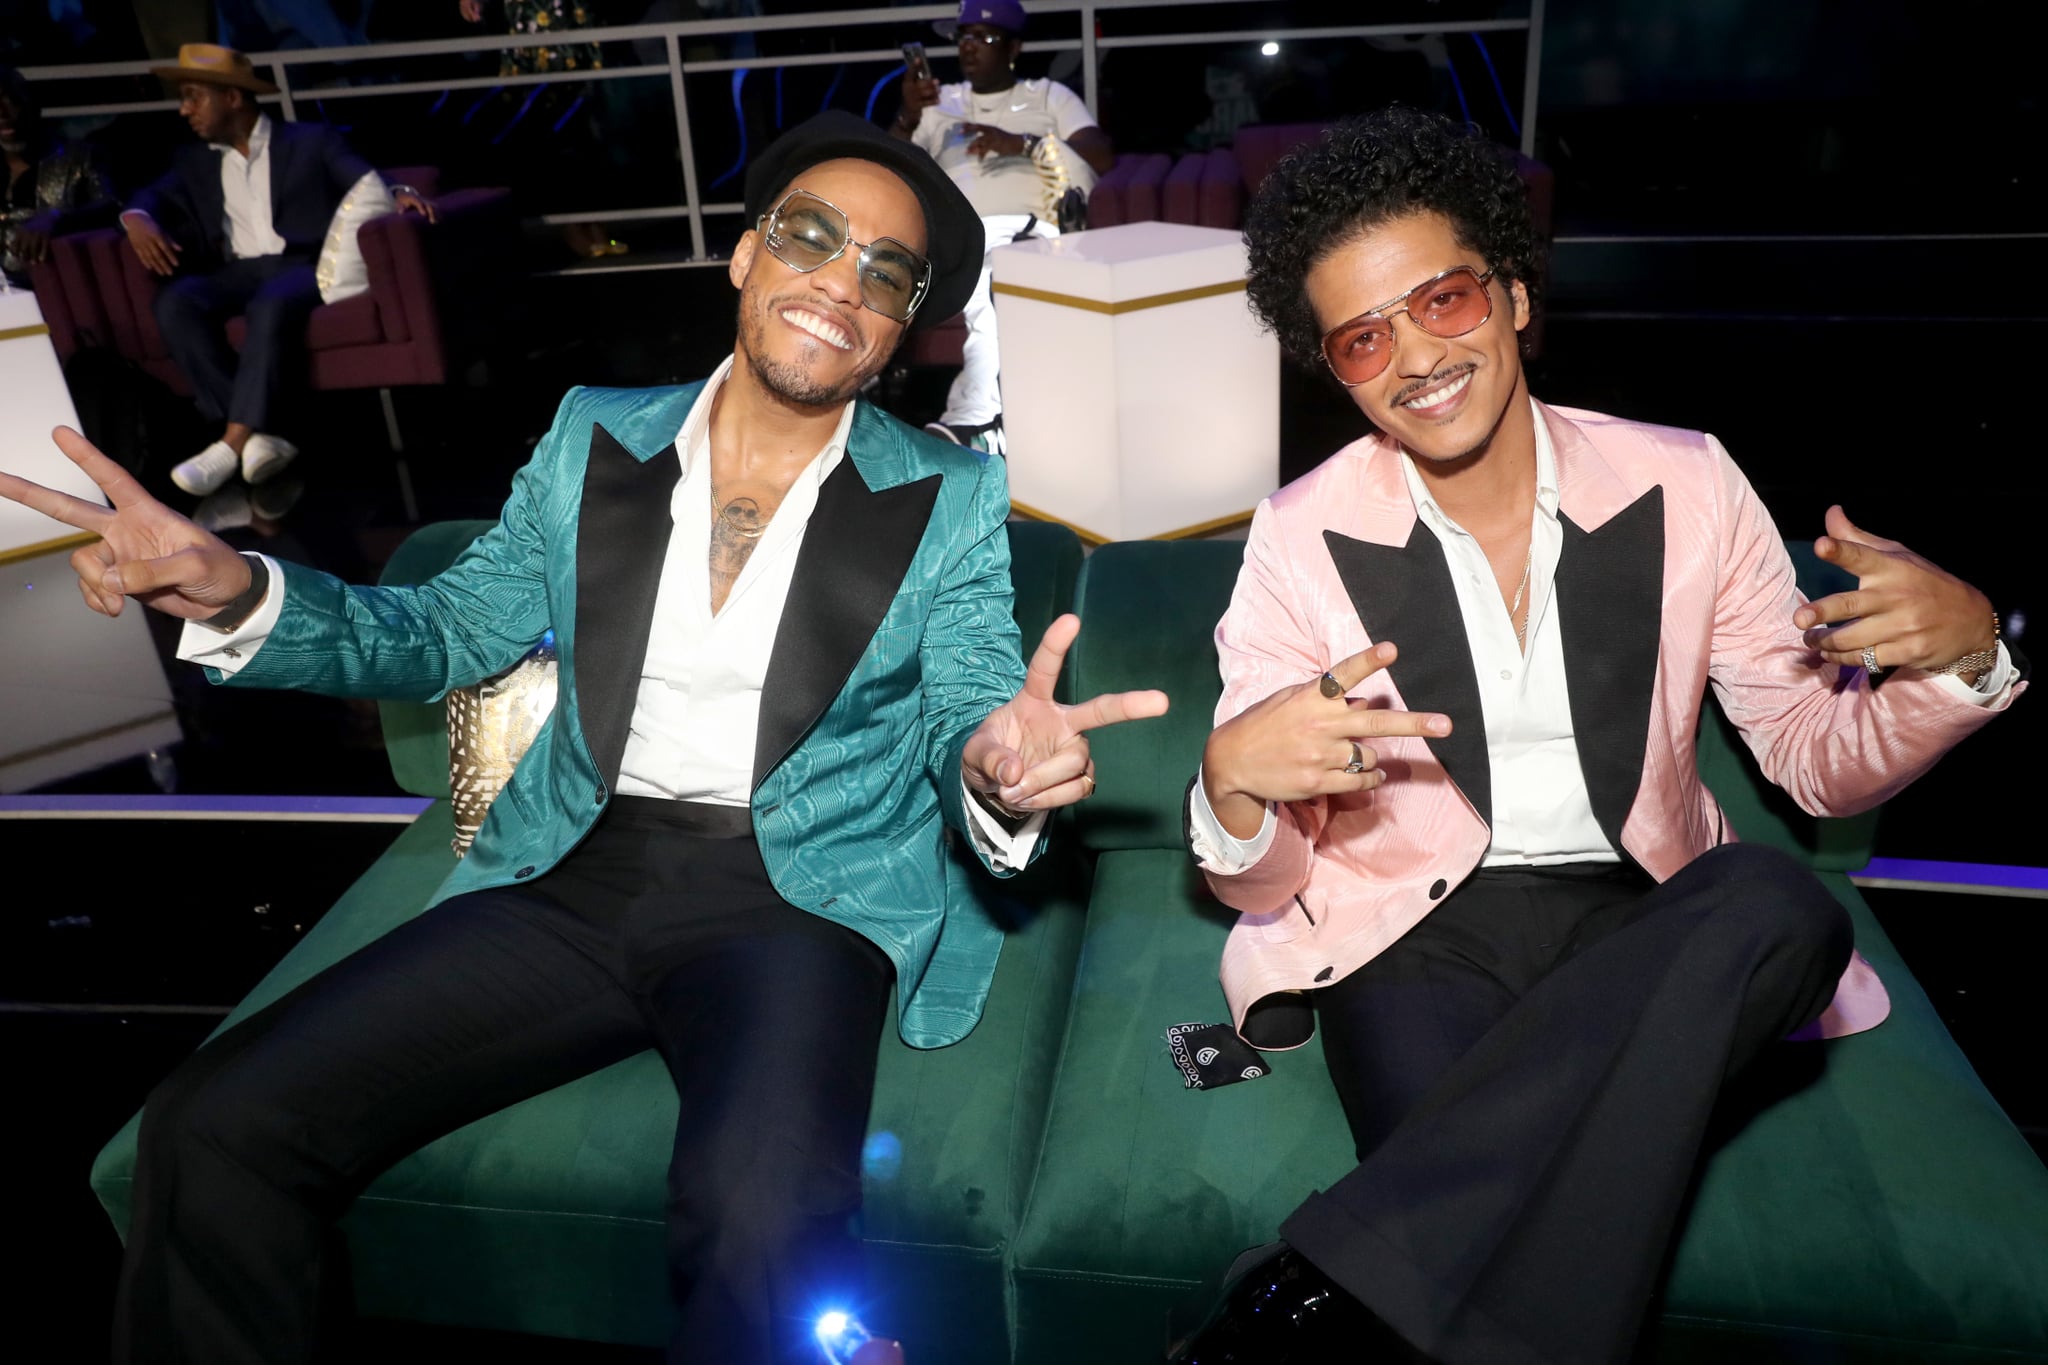 LOS ANGELES, CALIFORNIA - JUNE 27: (L-R) Anderson .Paak and Bruno Mars attend the BET Awards 2021 at Microsoft Theater on June 27, 2021 in Los Angeles, California. (Photo by Johnny Nunez/Getty Images for BET)